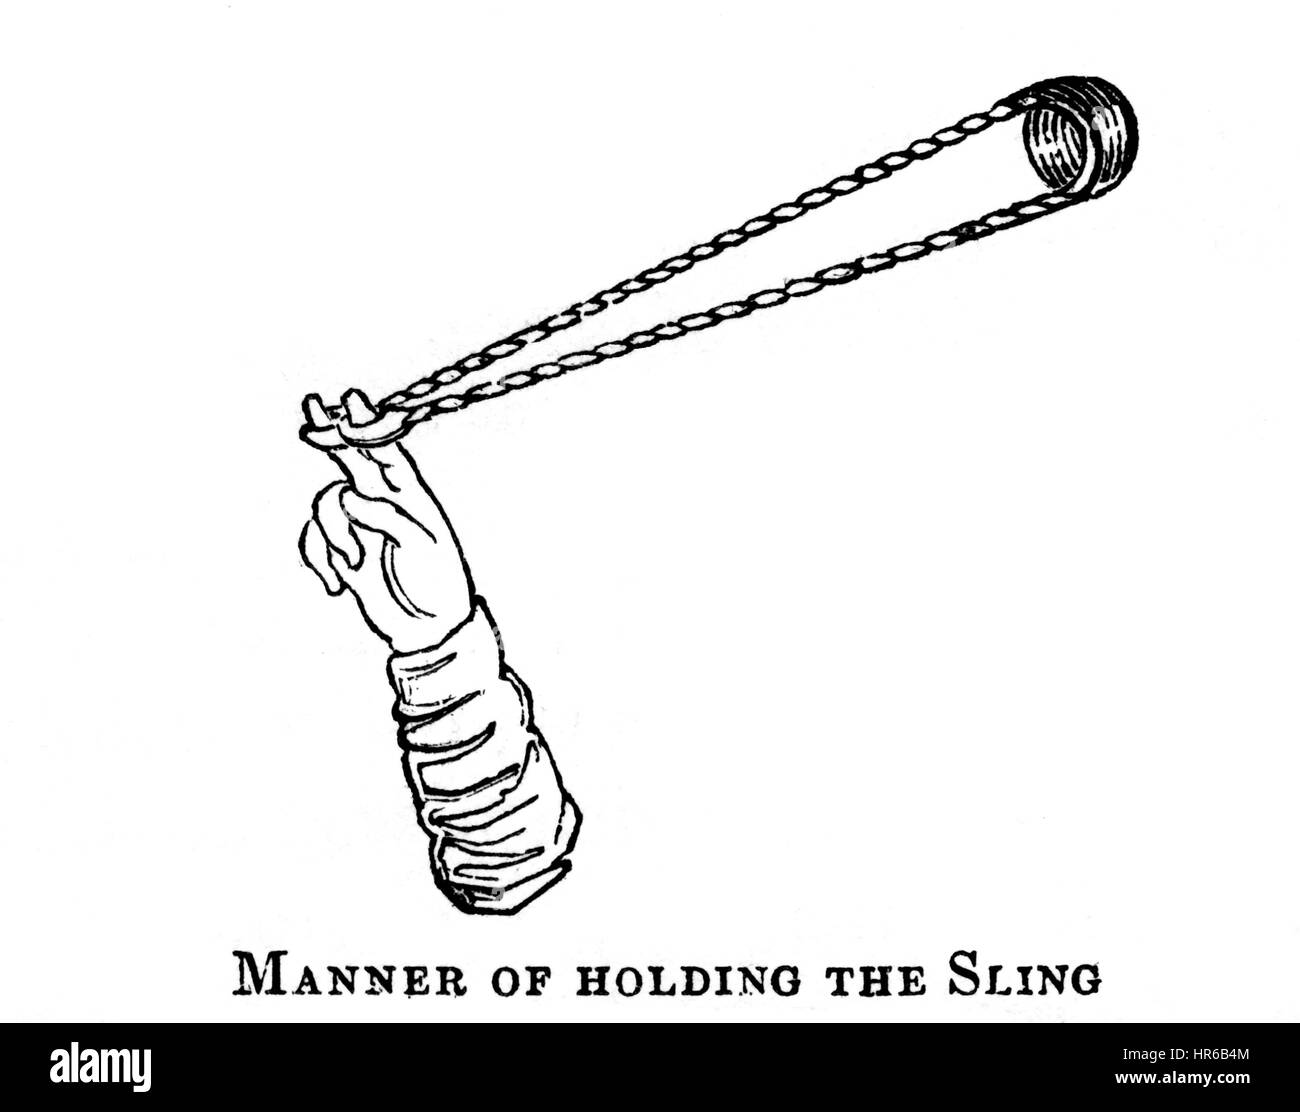 An illustration of the Manner of Holding a Sling in the 13th Century scanned at high resolution from a book printed in 1831. Believed copyright free. Stock Photo